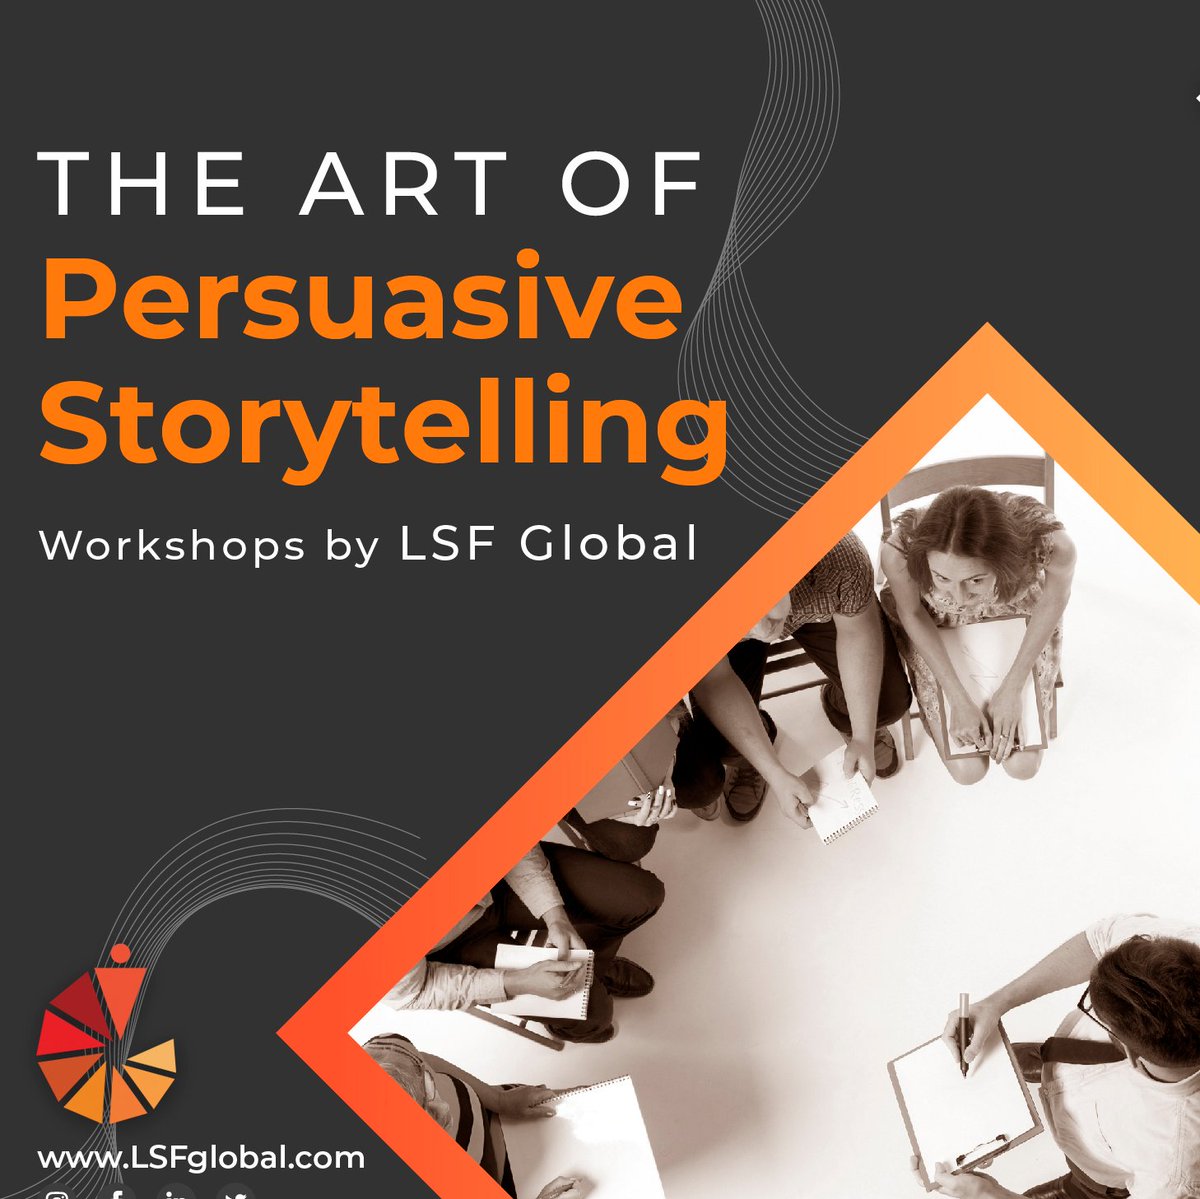 Do you want to engage your clients better? Learn the Art of Persuasive Storytelling through workshops by @LSFGlobal. Visit us at lsfglobal.com/the-art-of-sto… 
#artofstorytelling #persuasivestorytelling #coaching #hrconsulting #clientrelations #Lsfglobal #skilldevelopment #experiential